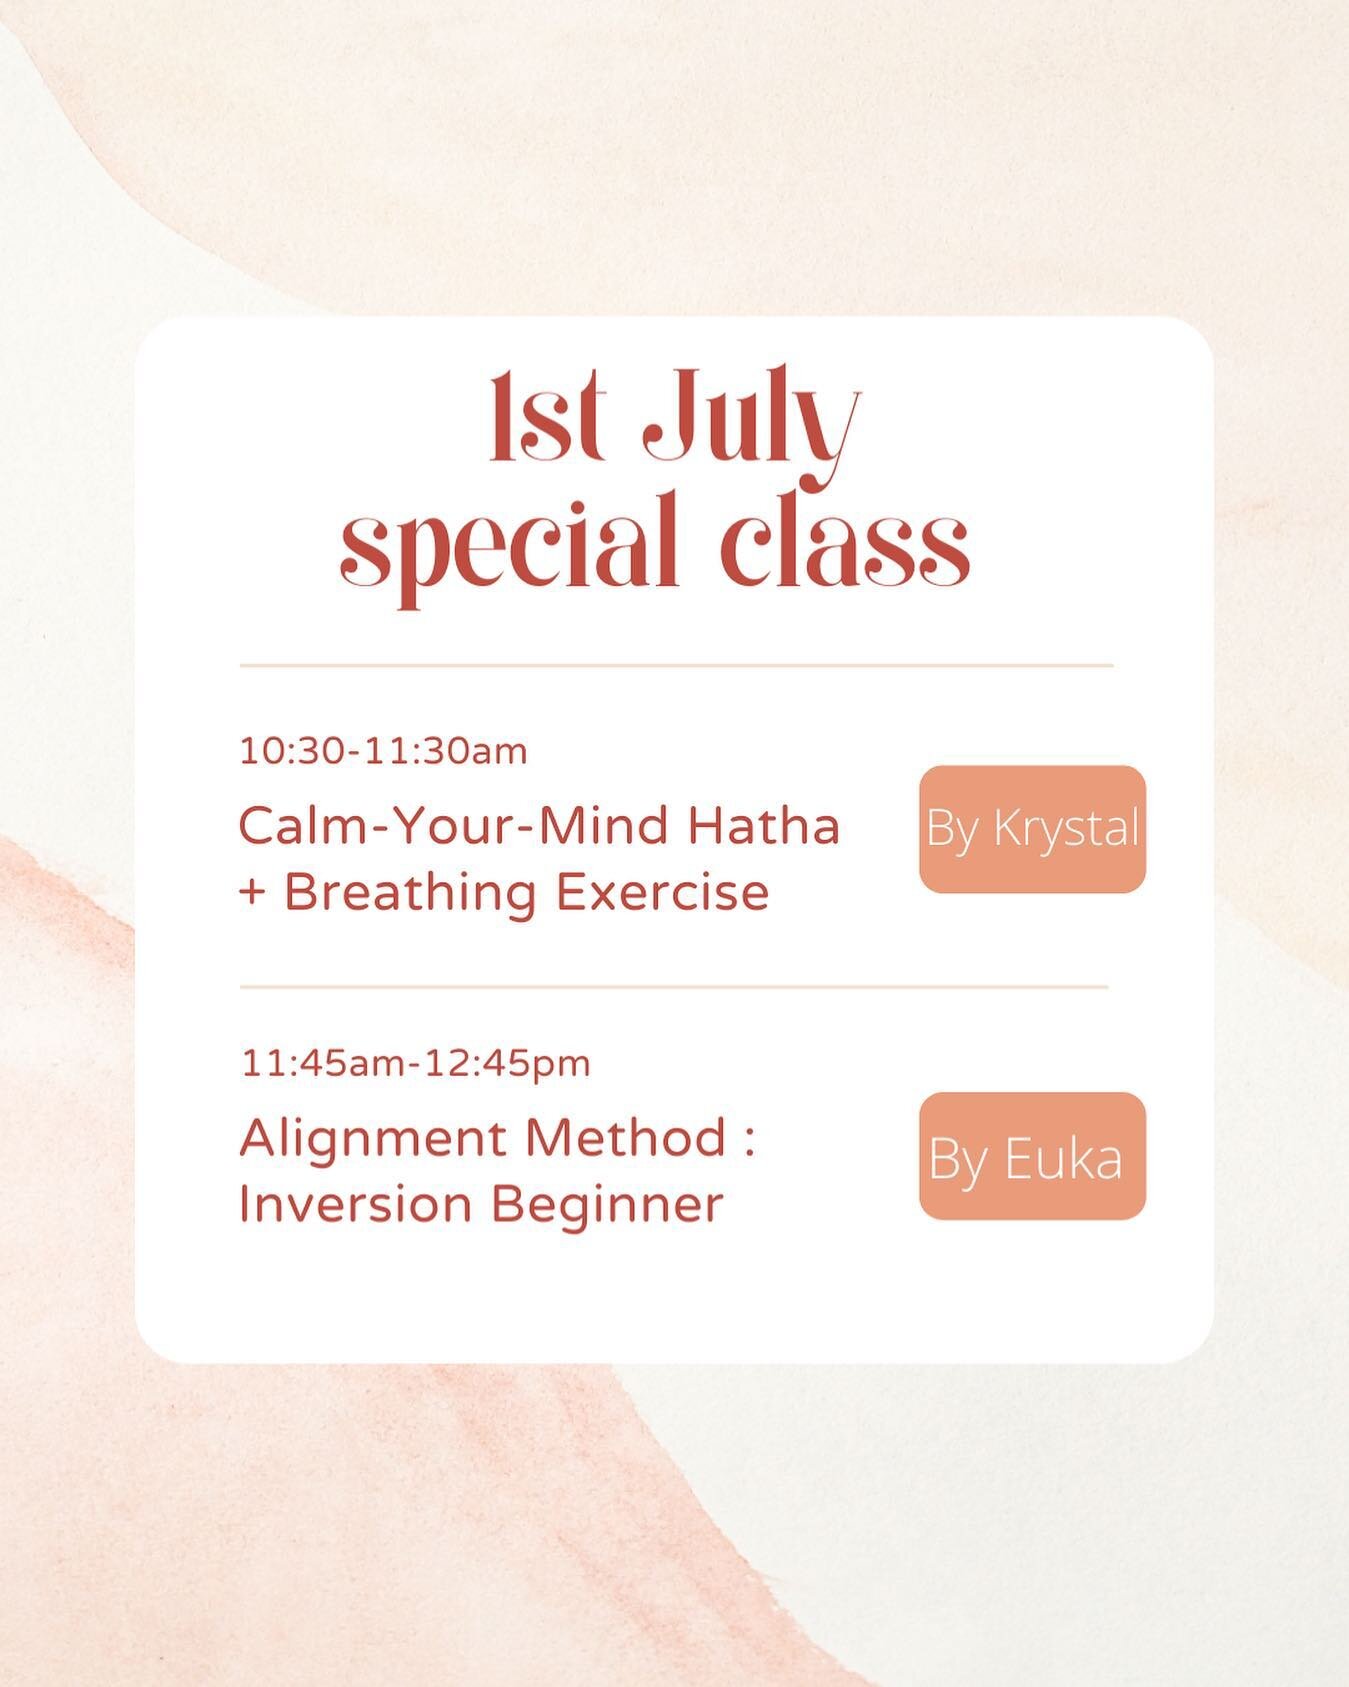 【Holiday Class🧡Begin the NEW month with us 😉】

2022 is half way though, to begin a new month with mindful Yoga practice &amp; have fun in upside down ☺️🙏 

1st June 2022

💛10:30-11:30am
Calm-Your-Mind Hatha + Relax Breathing Exercise
by Krystal @